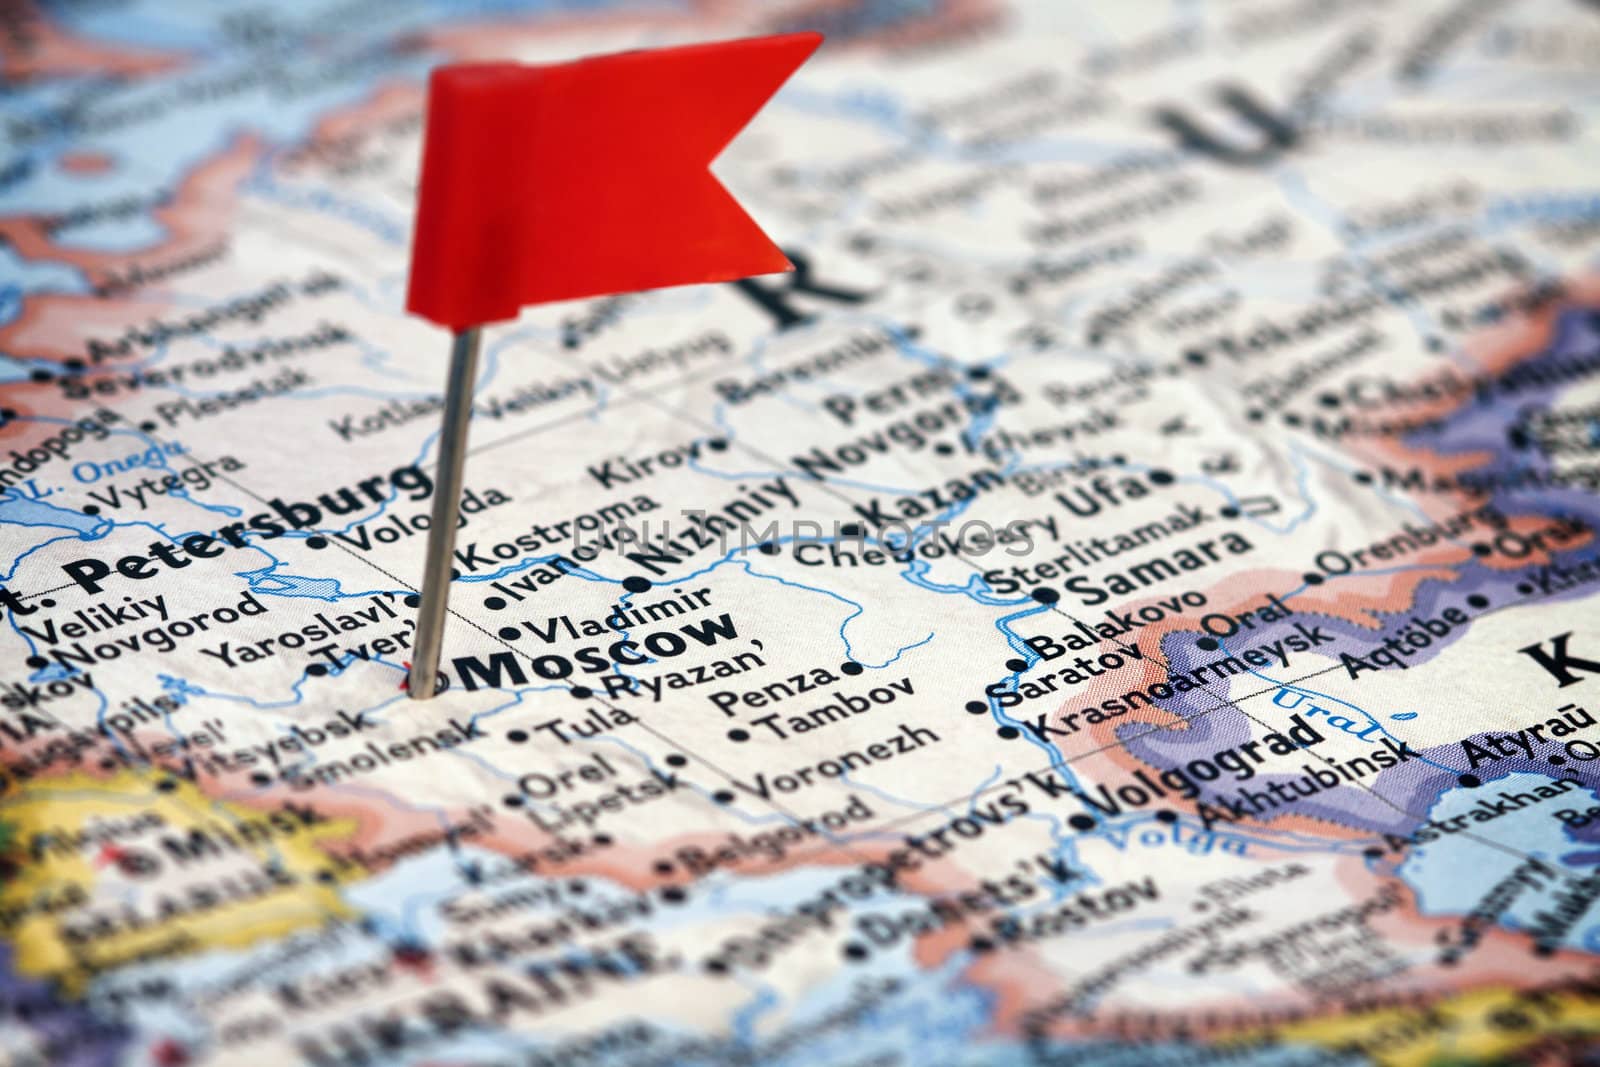 Red flag pushpin in the map of Russia pointing Moscow